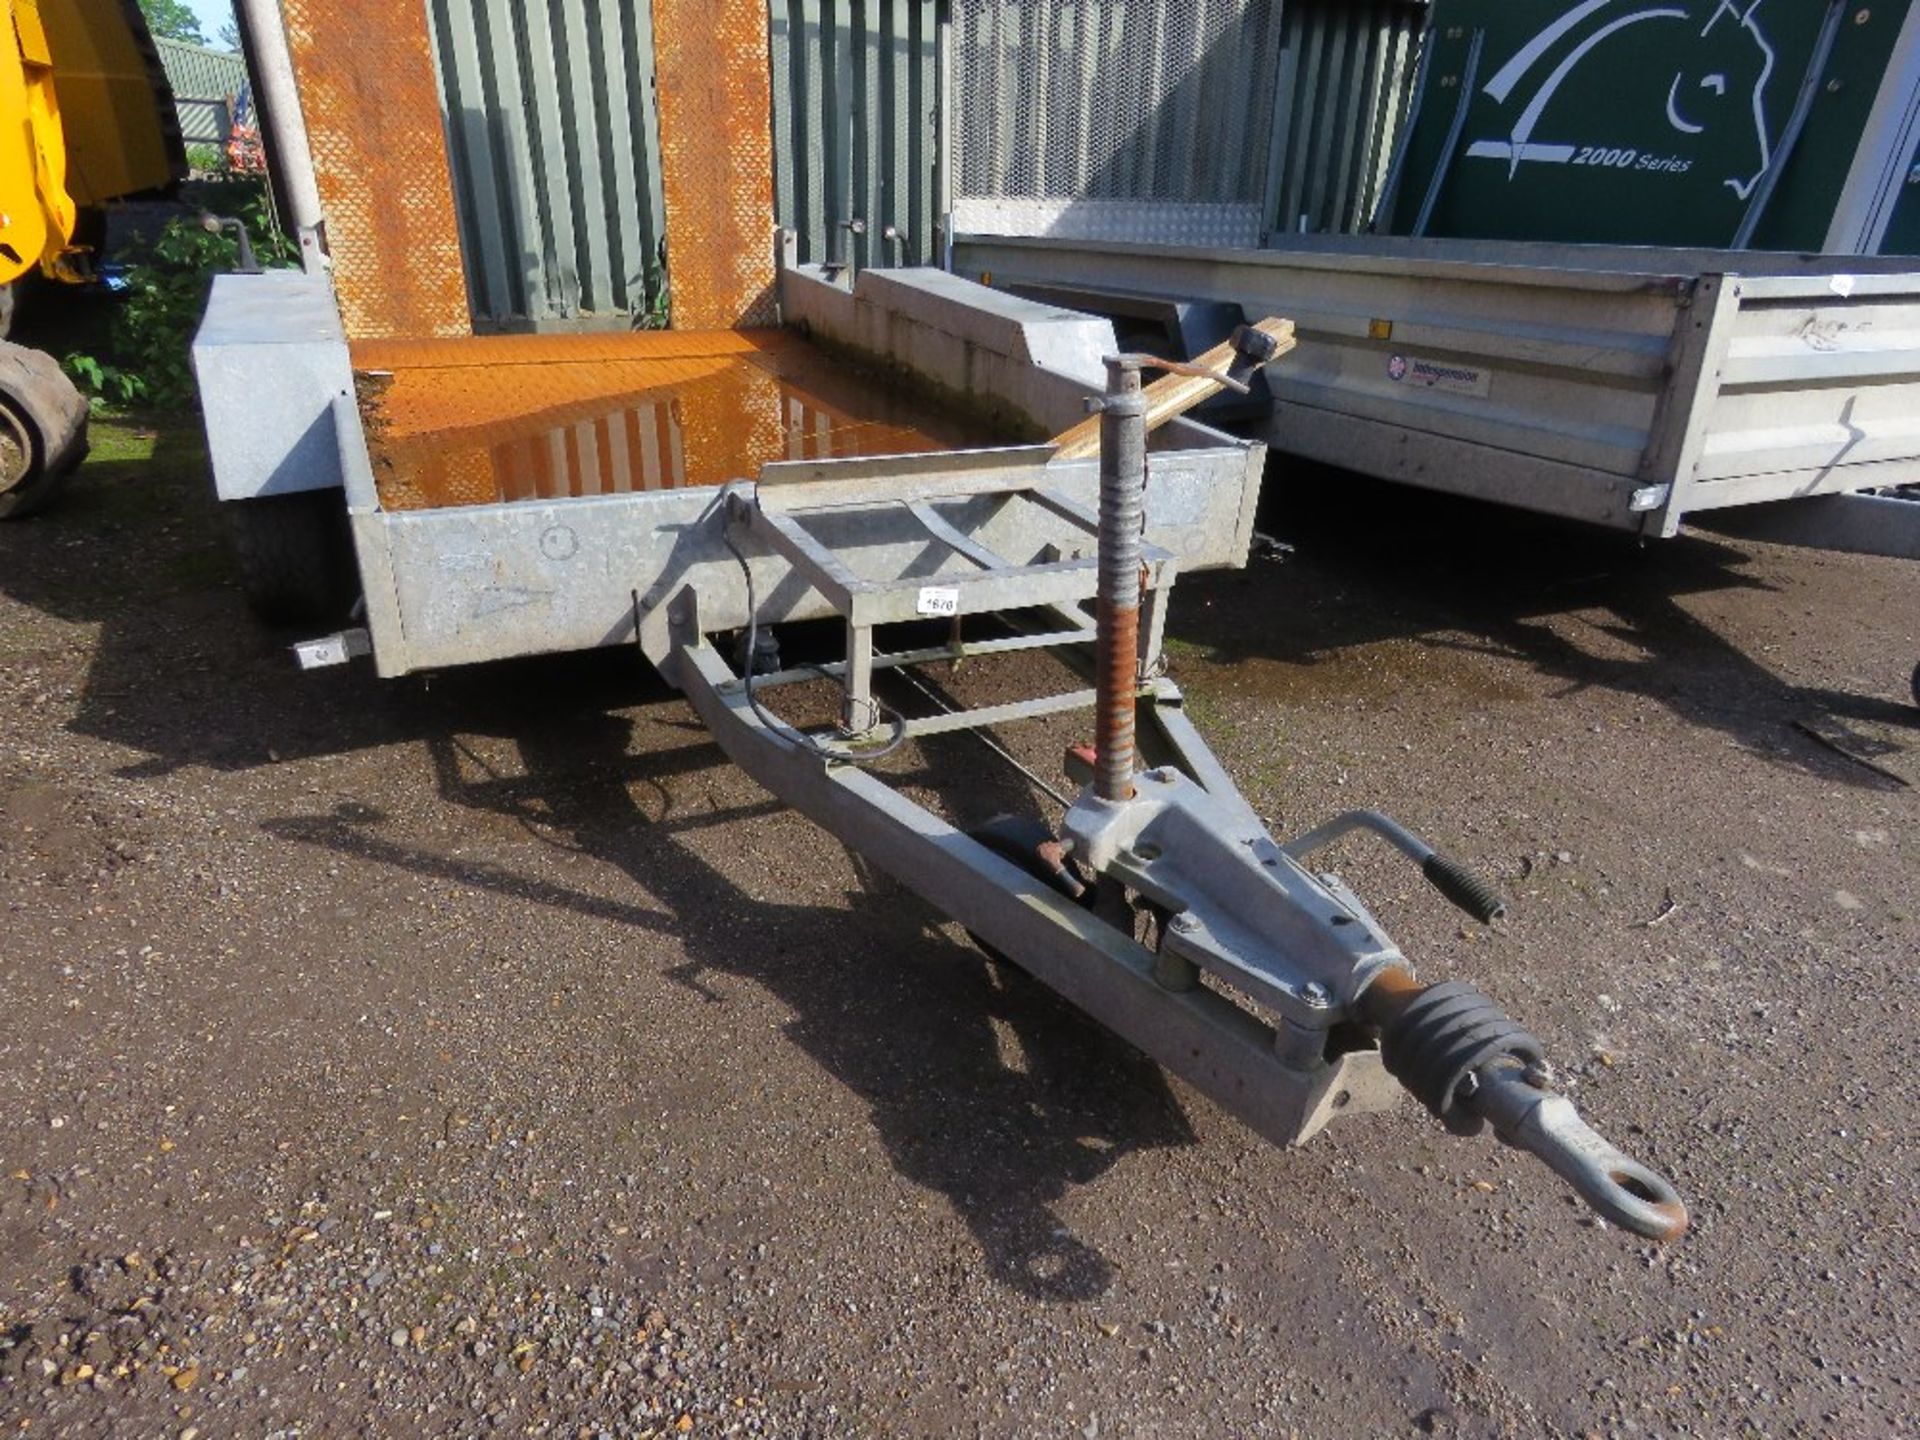 INDESPENSION HEAVY DUTY TWIN AXLED PLANT TRAILER, 1.7M X 3M BED SIZE APPROX. CHEQUER PLATE STEEL FLO